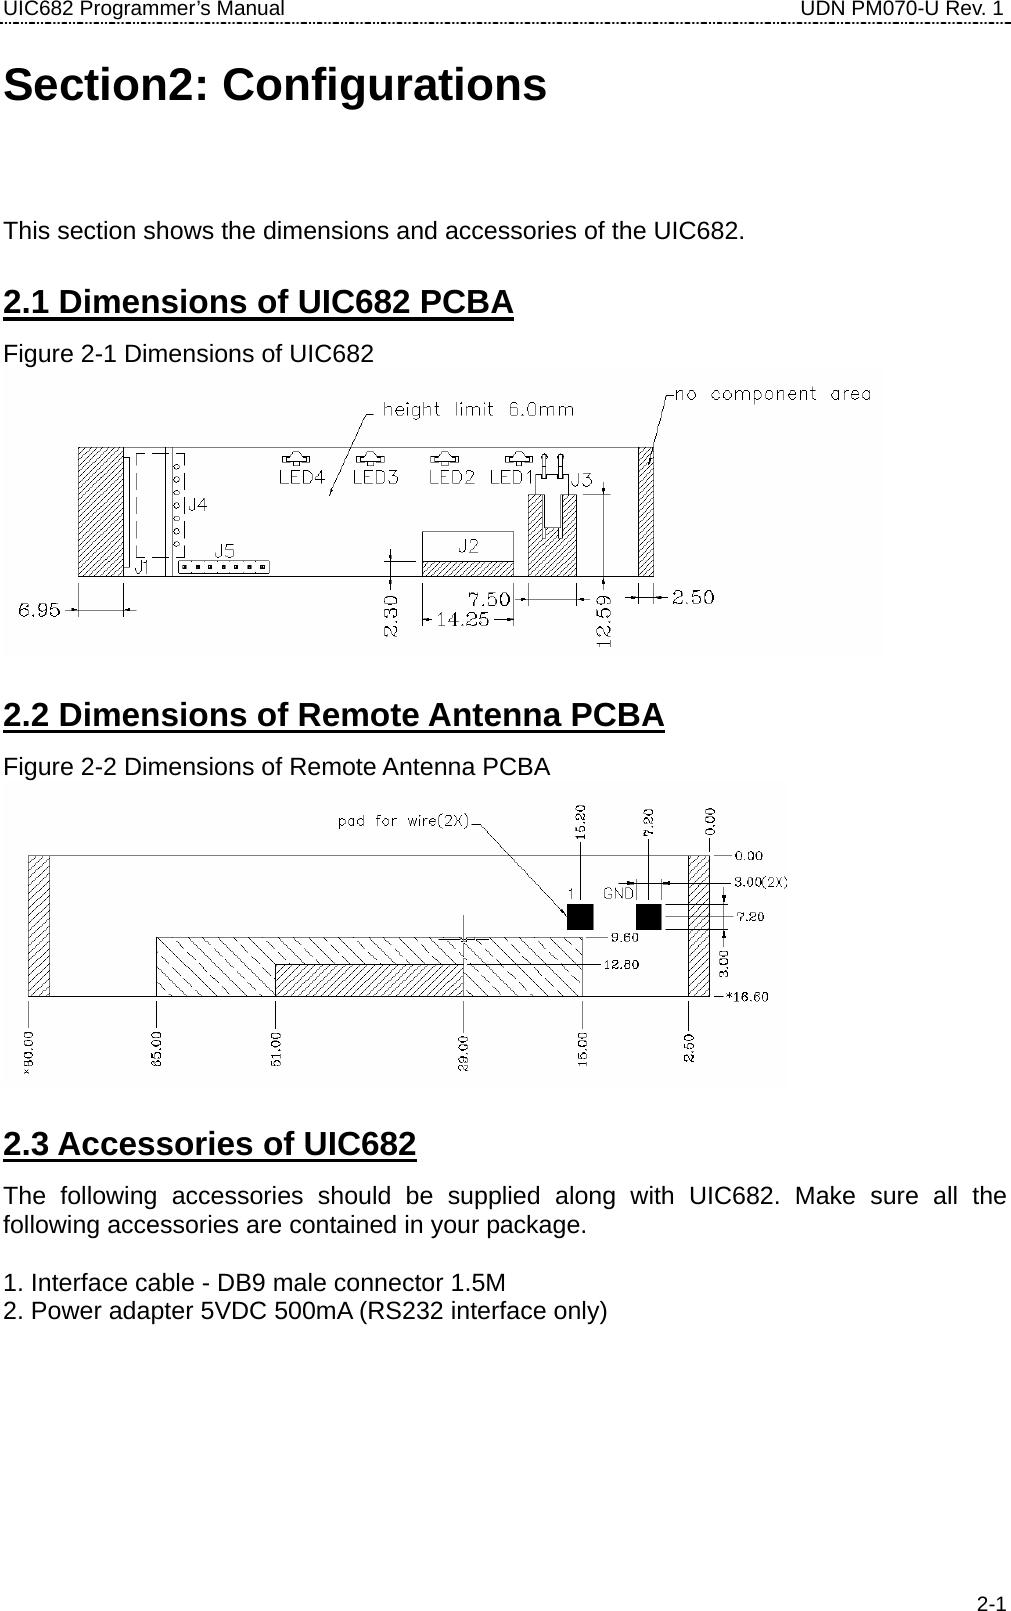 UIC682 Programmer’s Manual                                     UDN PM070-U Rev. 1 Section2: Configurations This section shows the dimensions and accessories of the UIC682. 2.1 Dimensions of UIC682 PCBA Figure 2-1 Dimensions of UIC682  2.2 Dimensions of Remote Antenna PCBA Figure 2-2 Dimensions of Remote Antenna PCBA  2.3 Accessories of UIC682 The following accessories should be supplied along with UIC682. Make sure all the following accessories are contained in your package.  1. Interface cable - DB9 male connector 1.5M 2. Power adapter 5VDC 500mA (RS232 interface only)    2-1